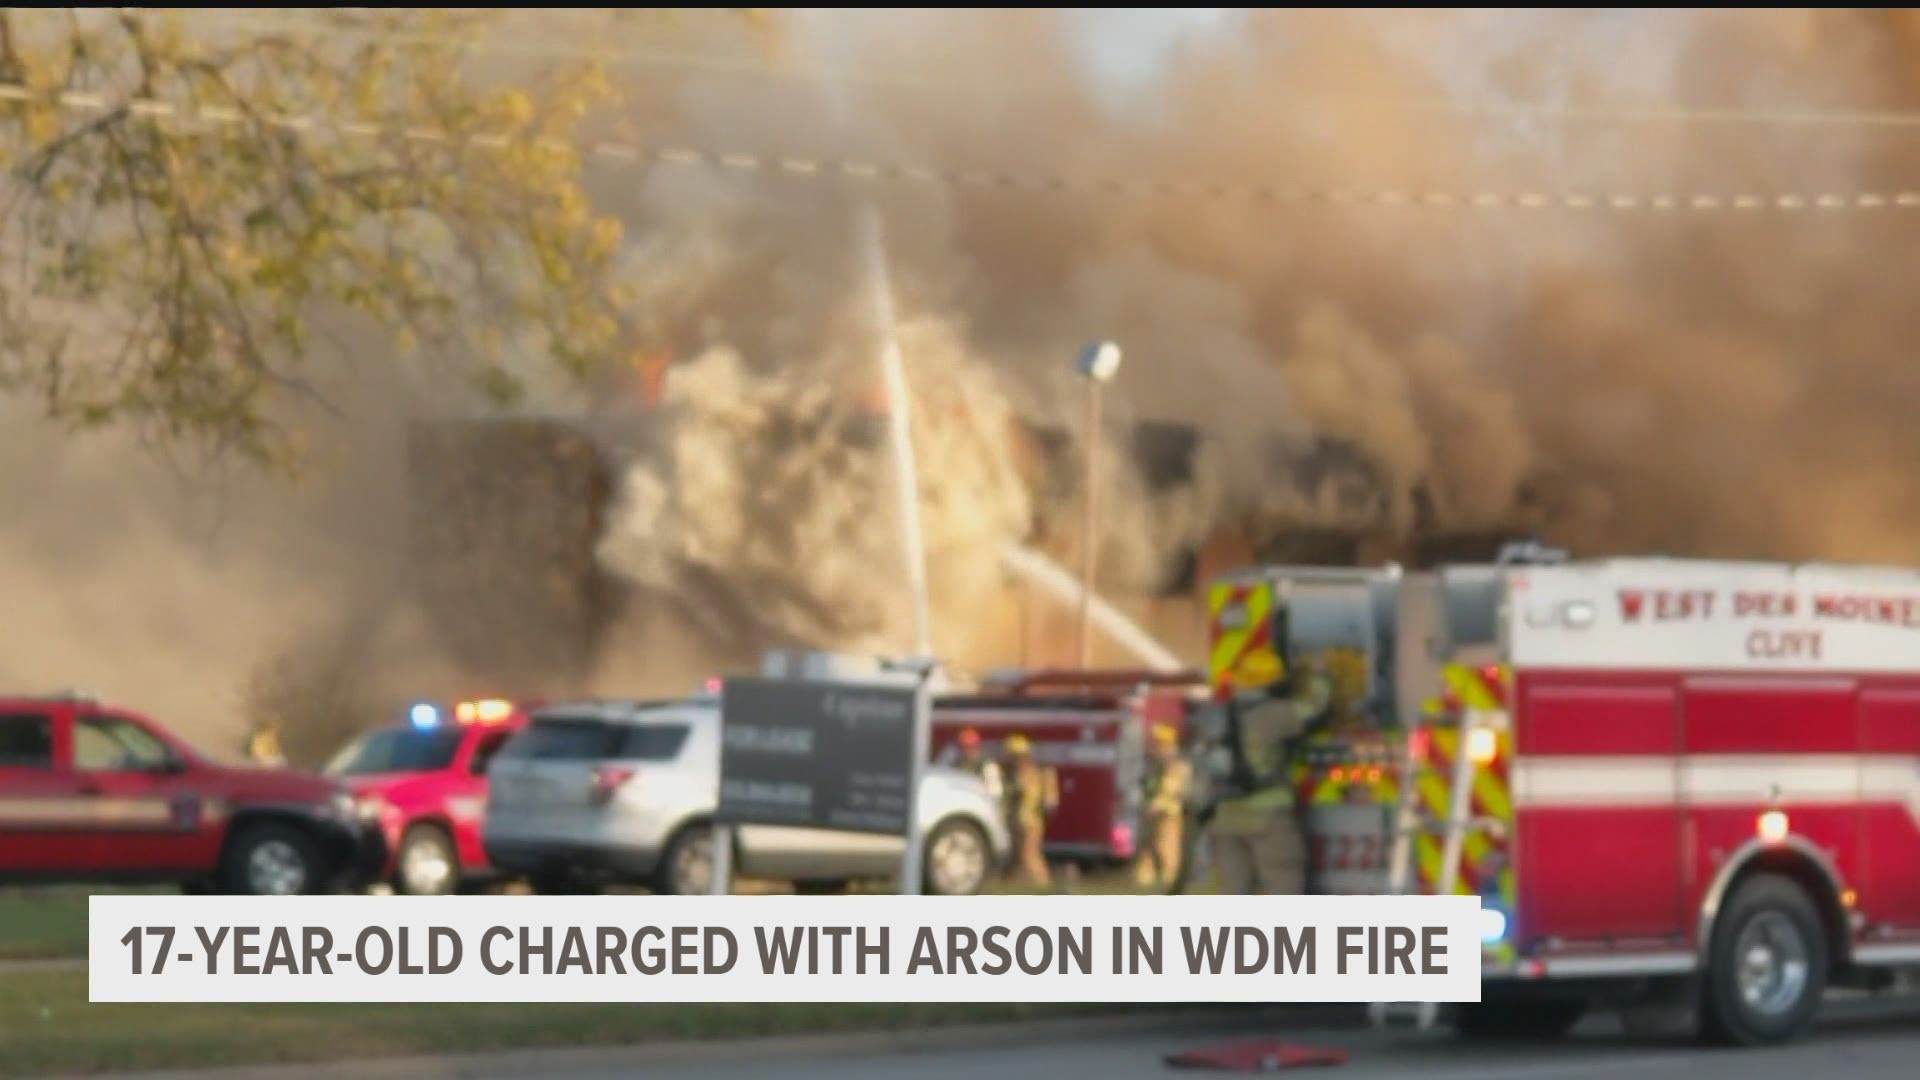 The teenager faces second-degree arson charges, a class "C" felony in Iowa.